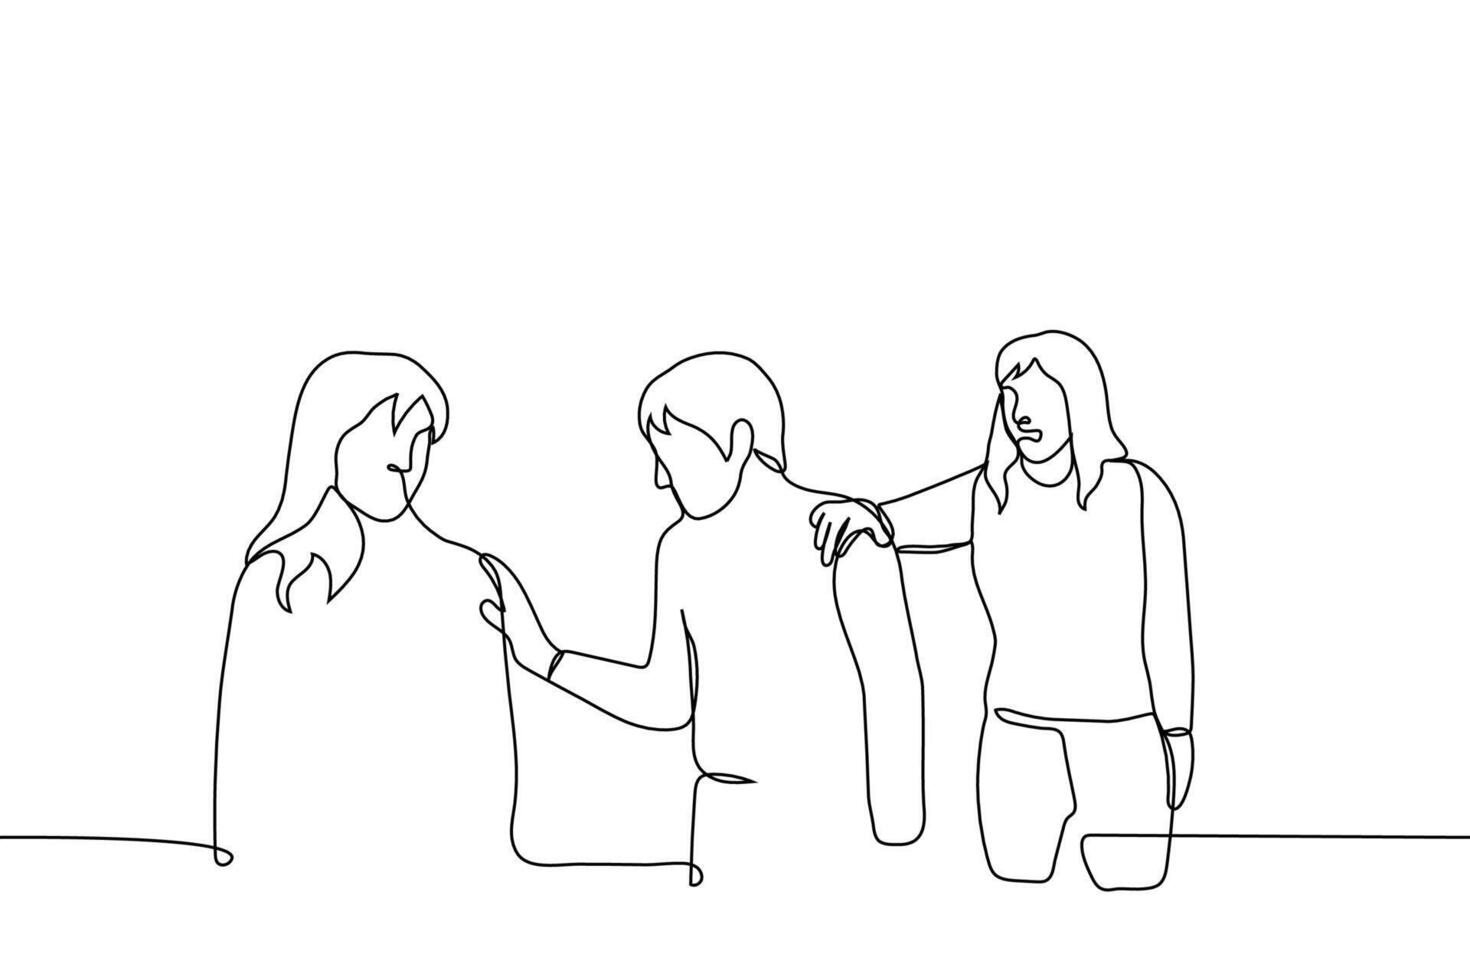 woman grabs the shoulder of man who addresses touches, strokes another woman - one line drawing. concept jealousy, friend stops from relationship, warn about dangerous, woman protection for friend vector